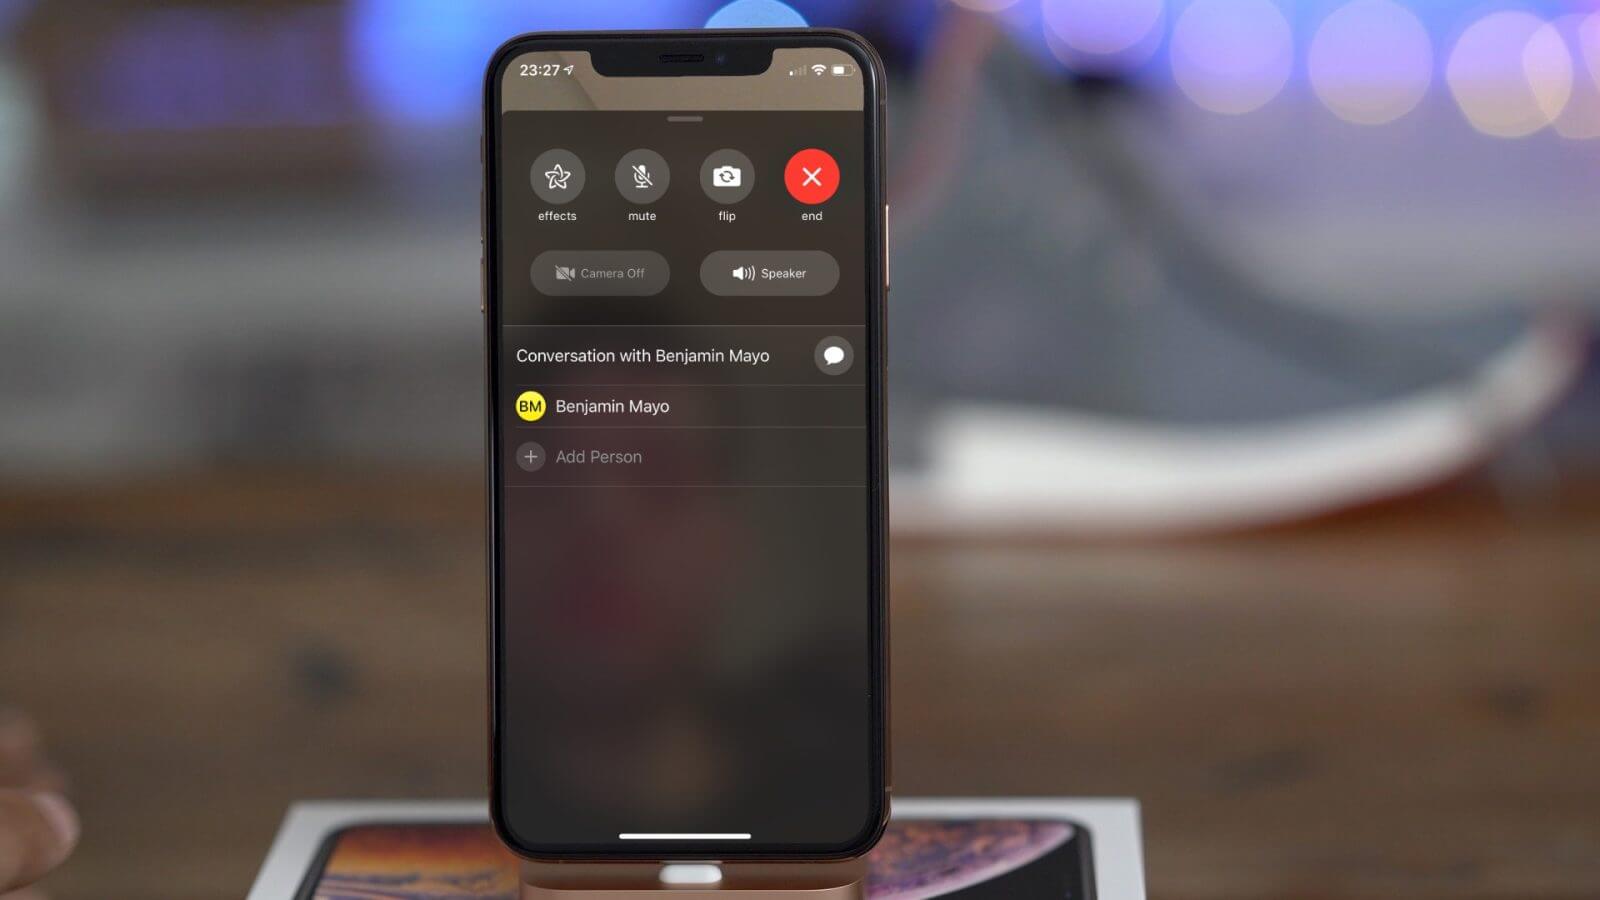  Bug In iPhone Causes Eavesdropping Using Facetime App